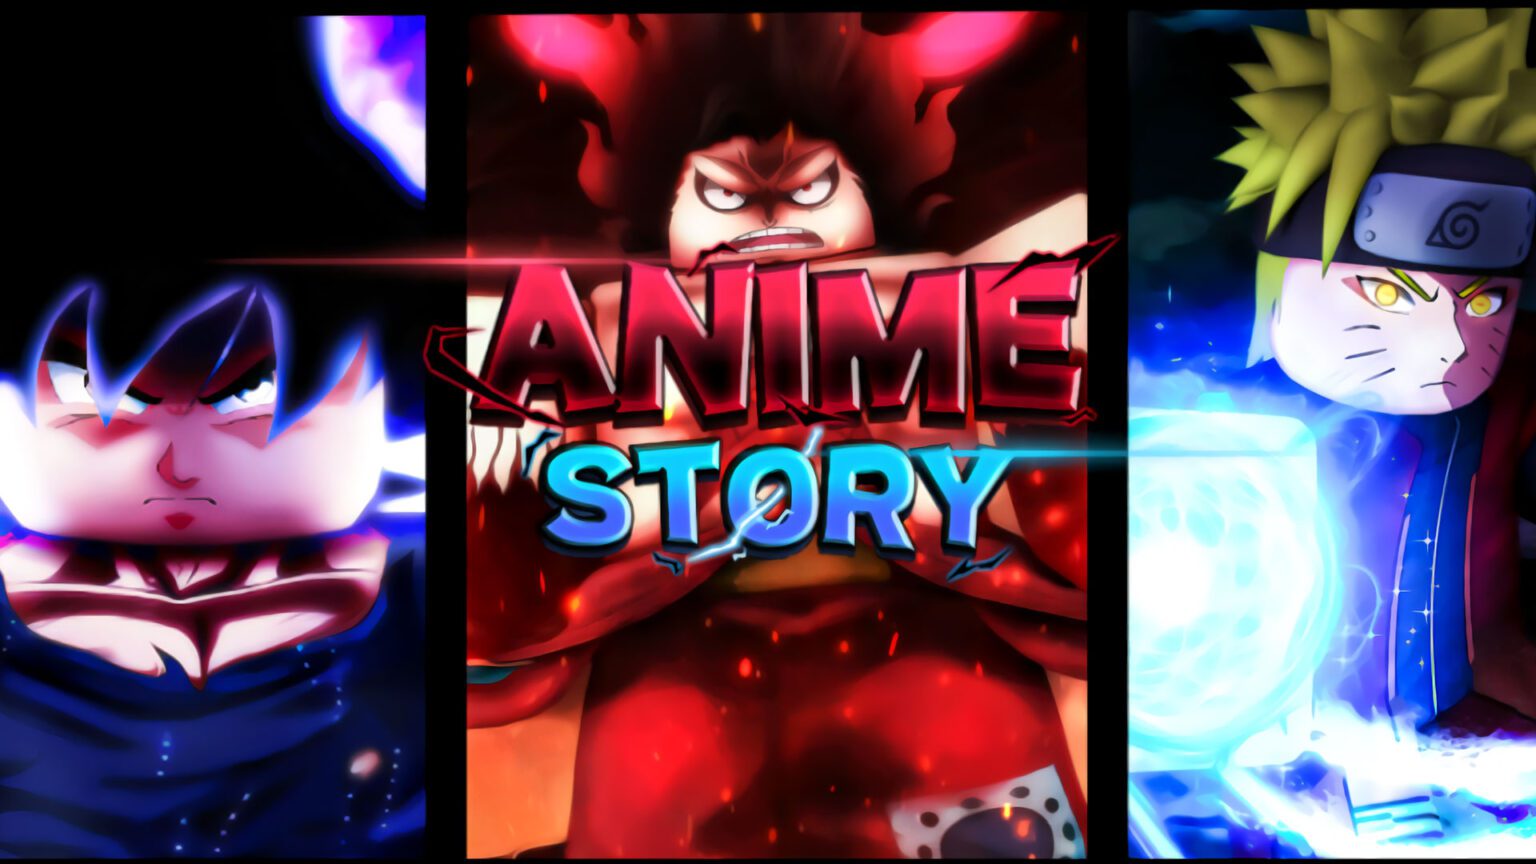 Update 1 of Anime Story